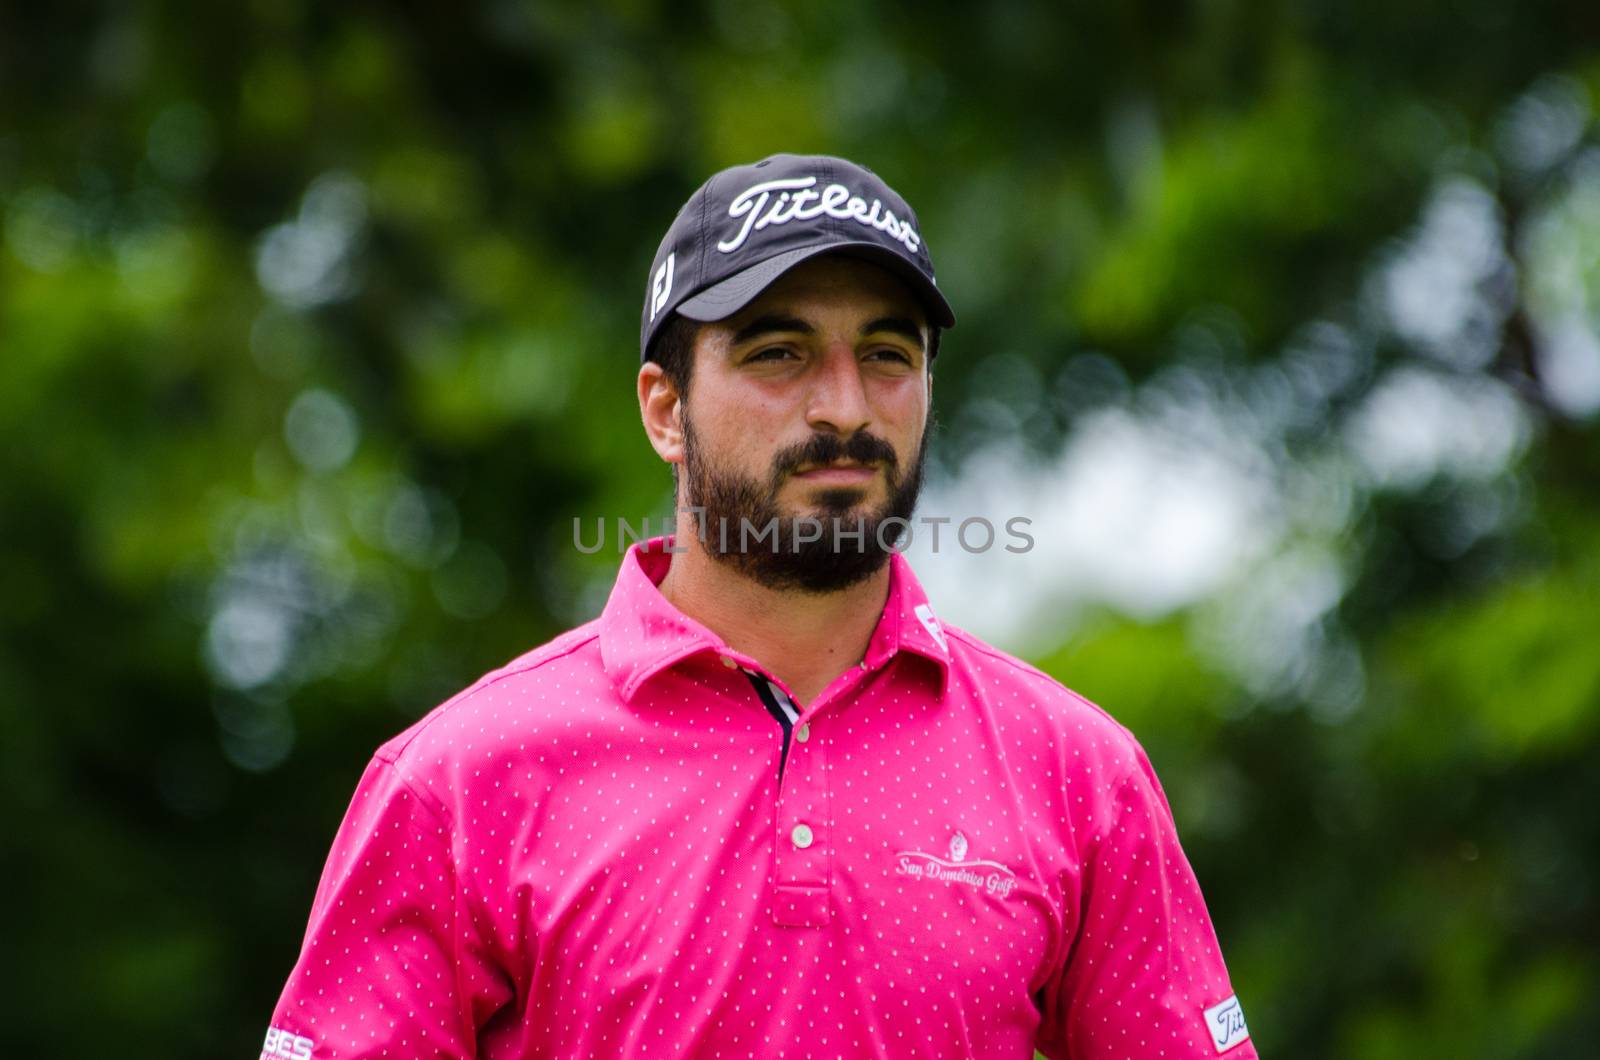 CHONBURI - JULY 31 : Francesco Laporta of Italy in King's Cup 2016 at Phoenix Gold Golf & Country Club Pattaya on July 31, 2016 in Chonburi, Thailand.